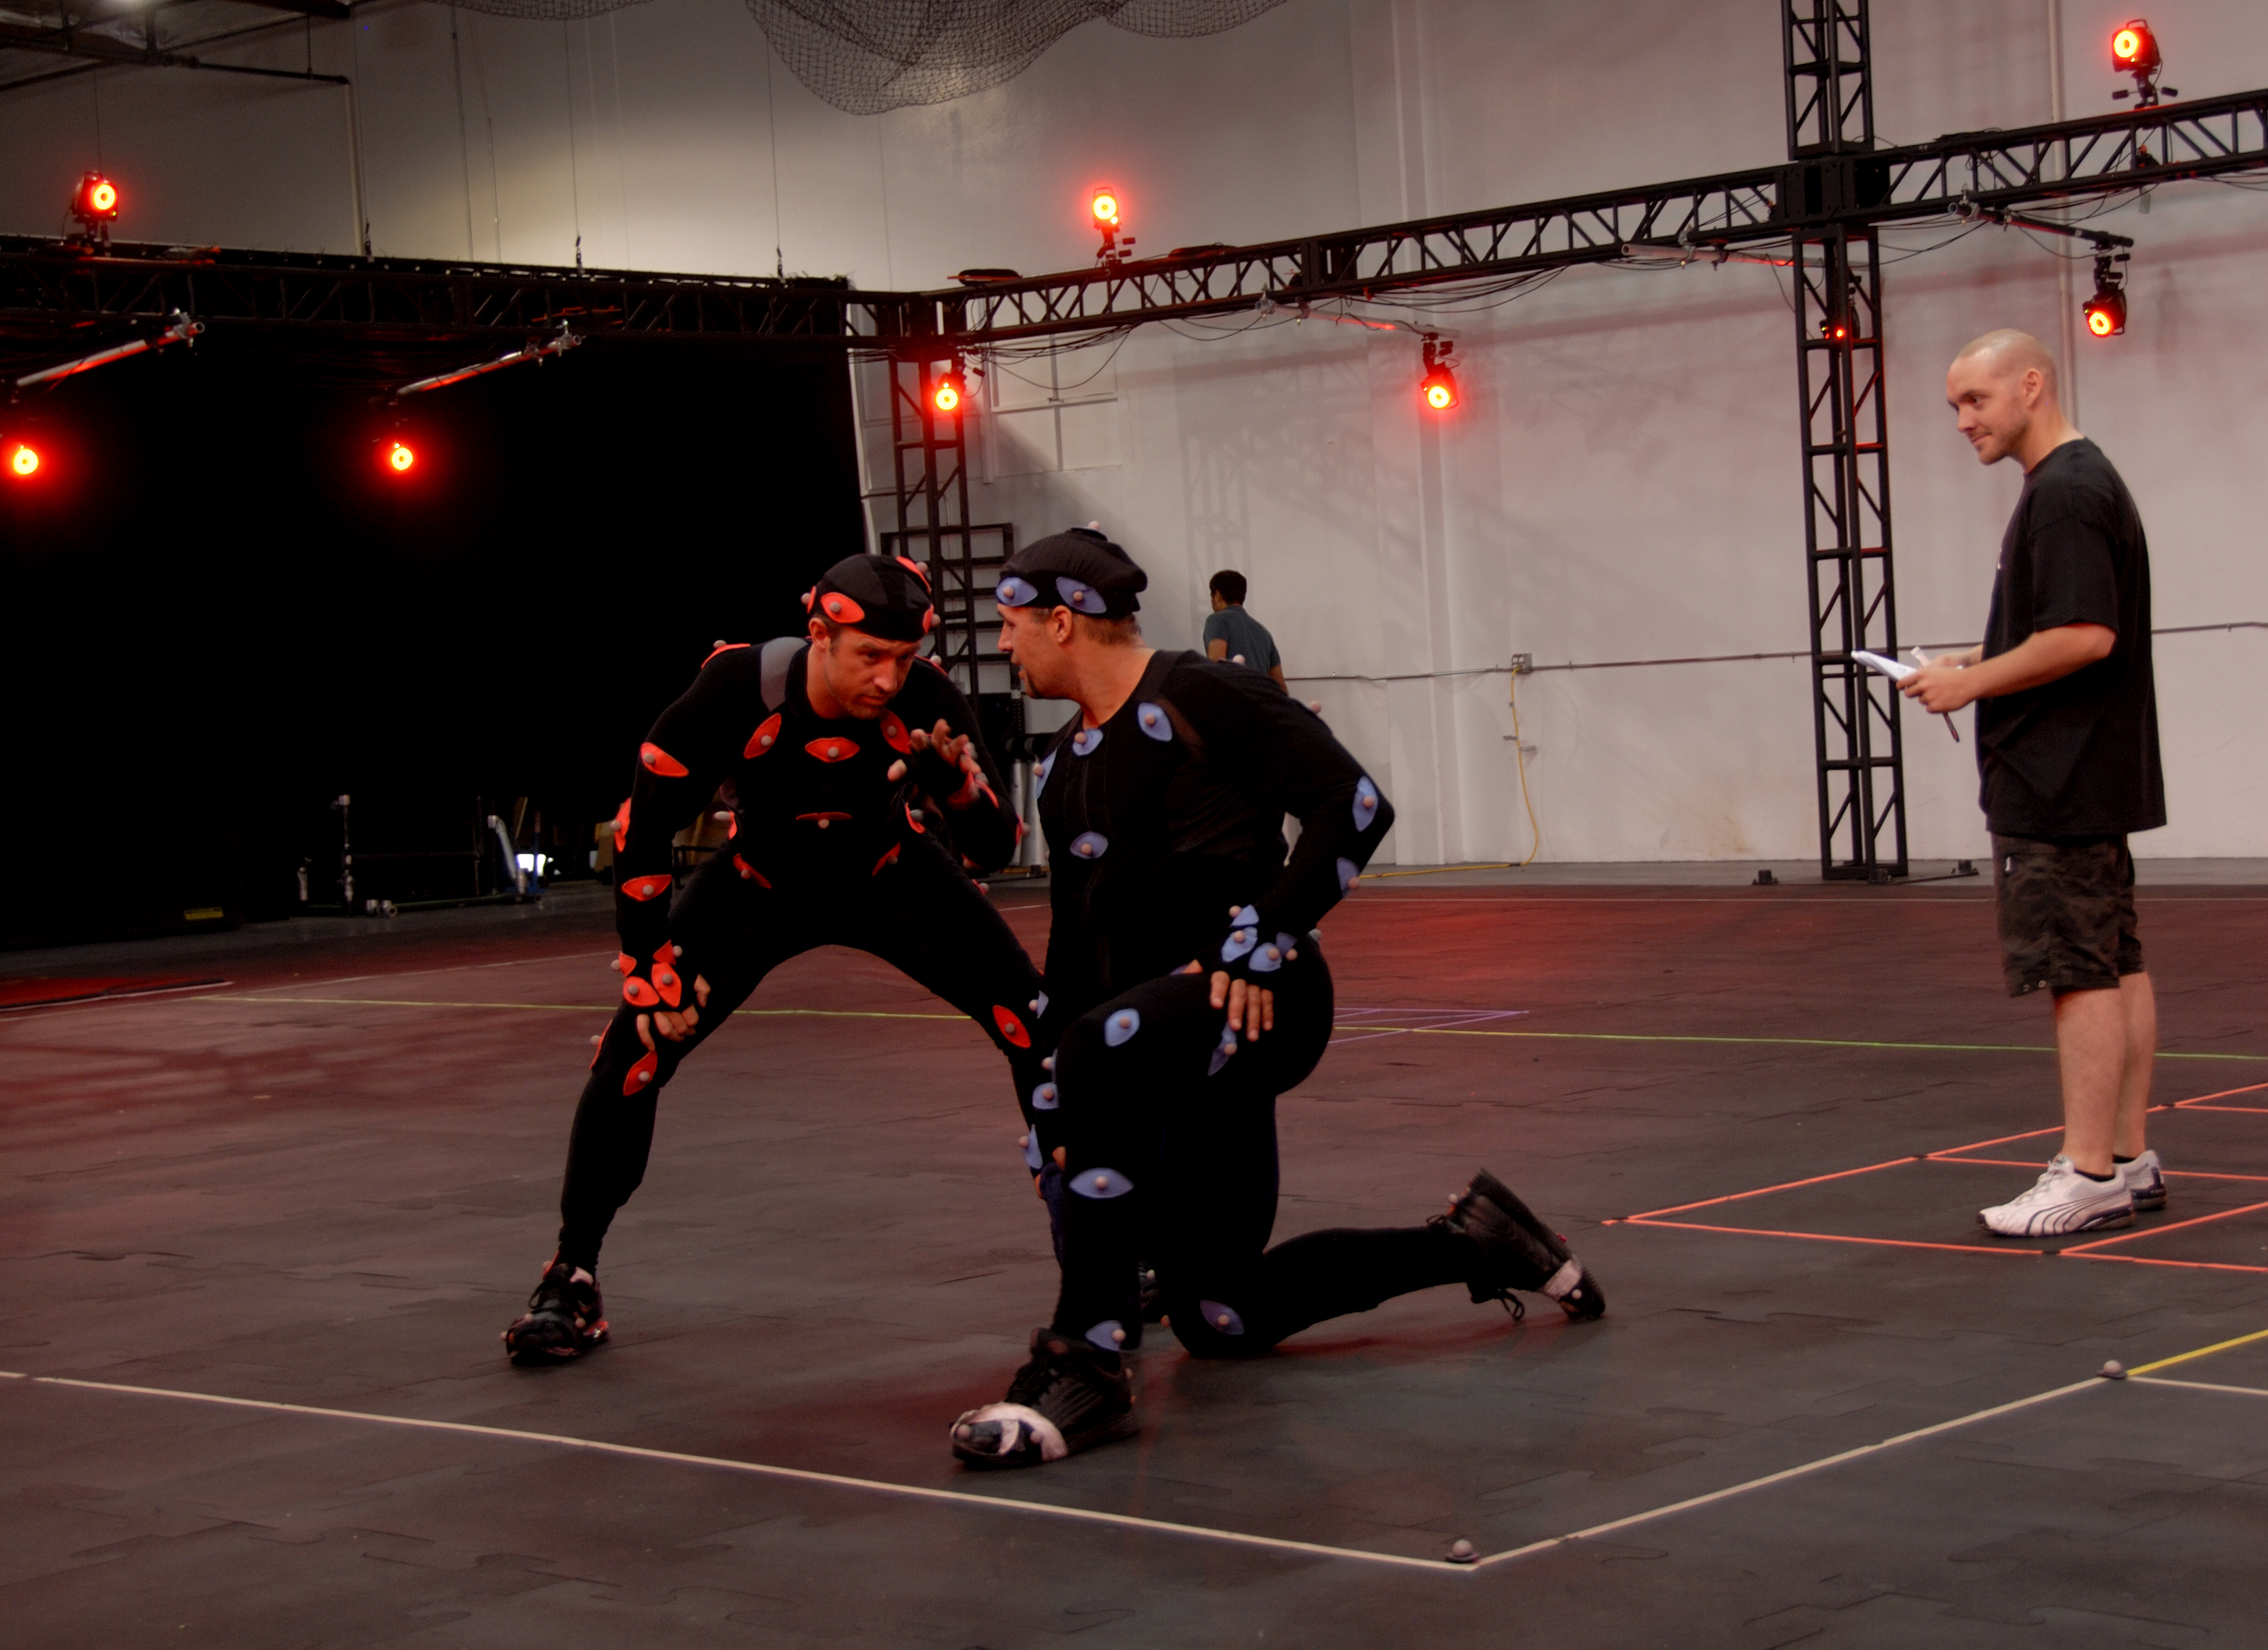 Jeremy Dunn, Actor and Motion Capture Specialist